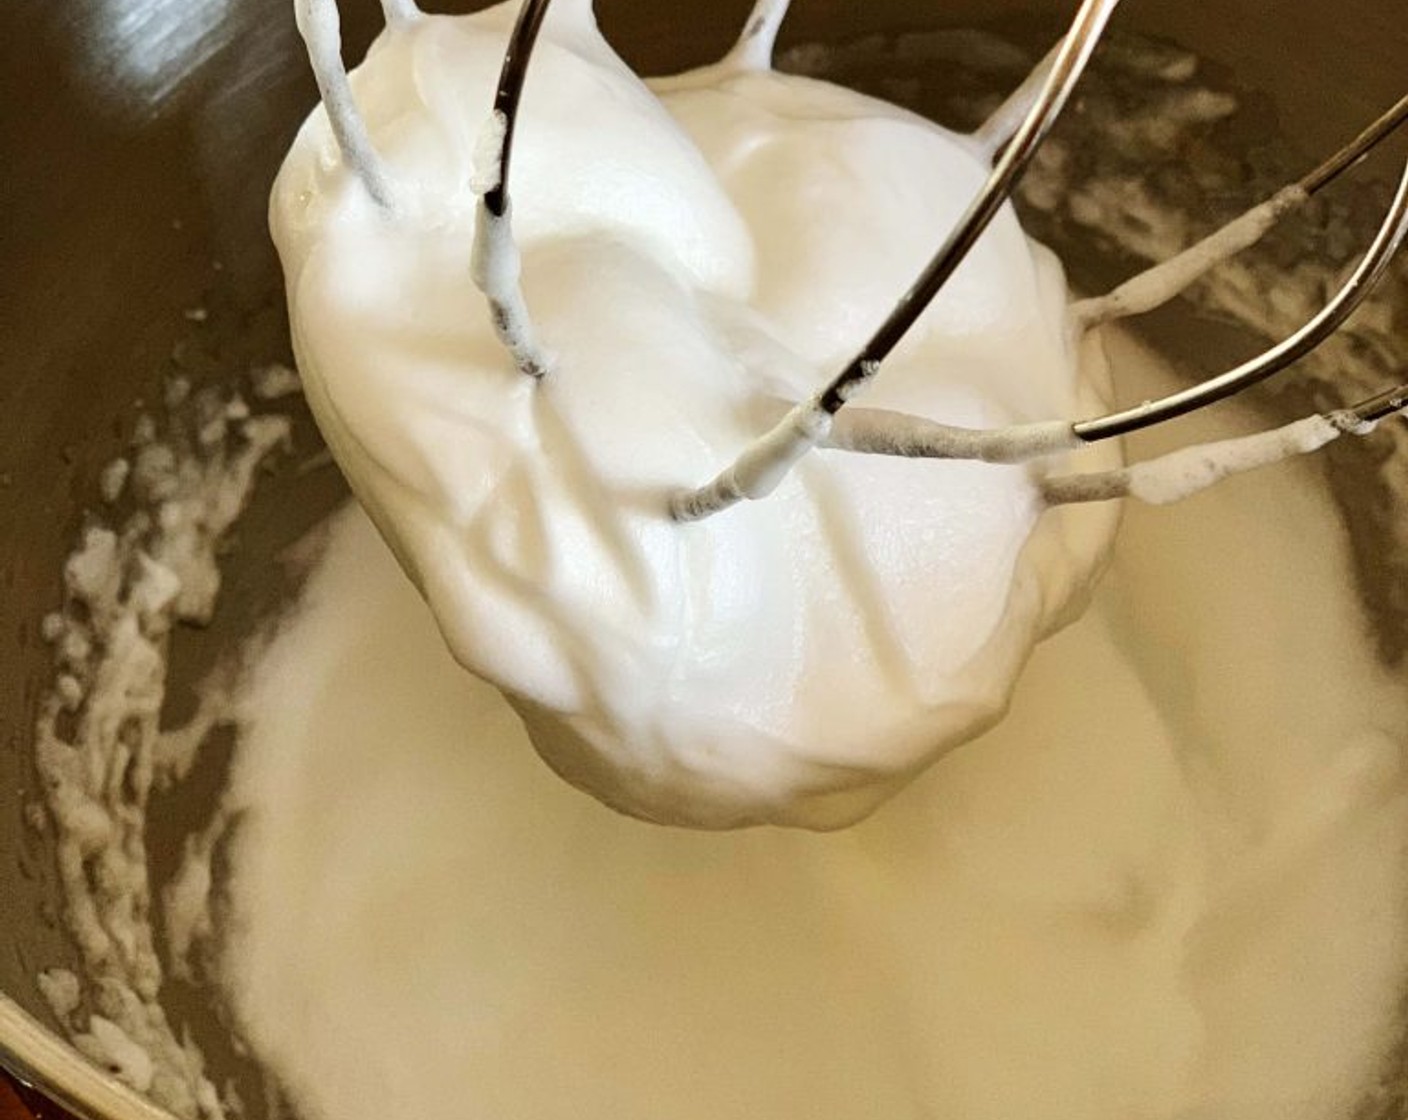 step 1 In a bowl of your electric mixer whip up the Eggs (2) until stiff peaks form.